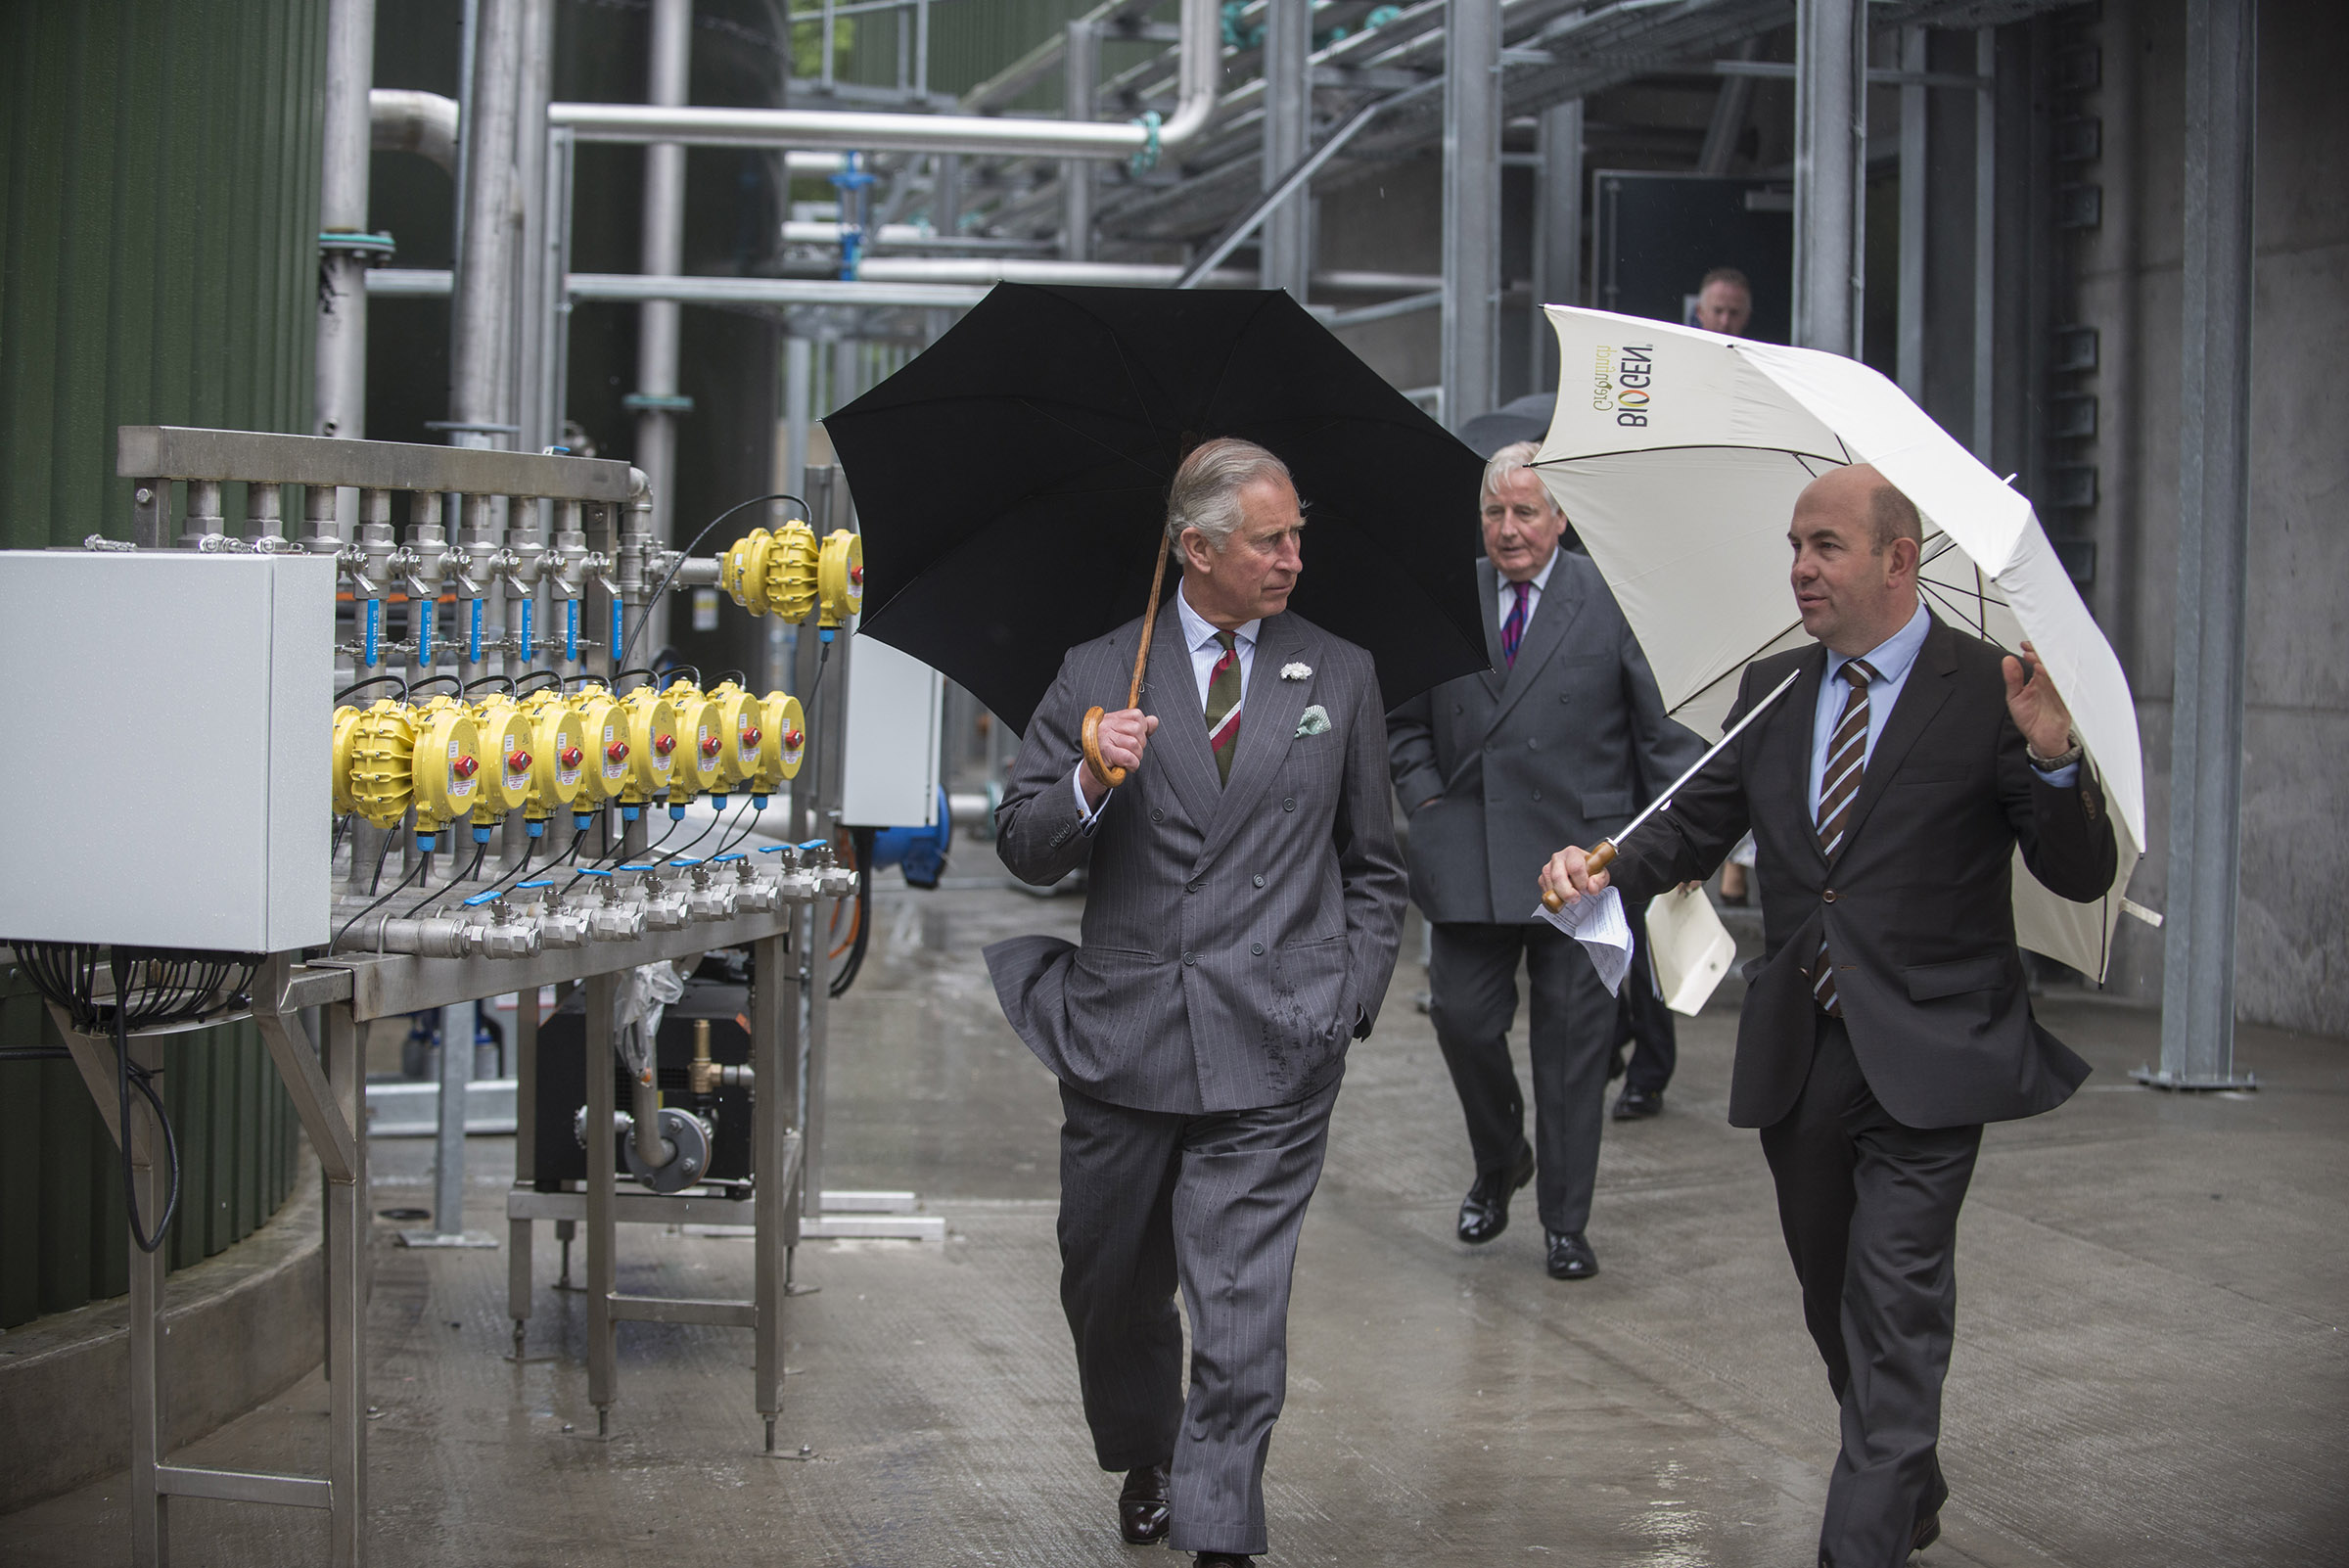 His Royal Highness, Prince of Wales and John Ibbett (Chairman Biogen) on the tour of the plant